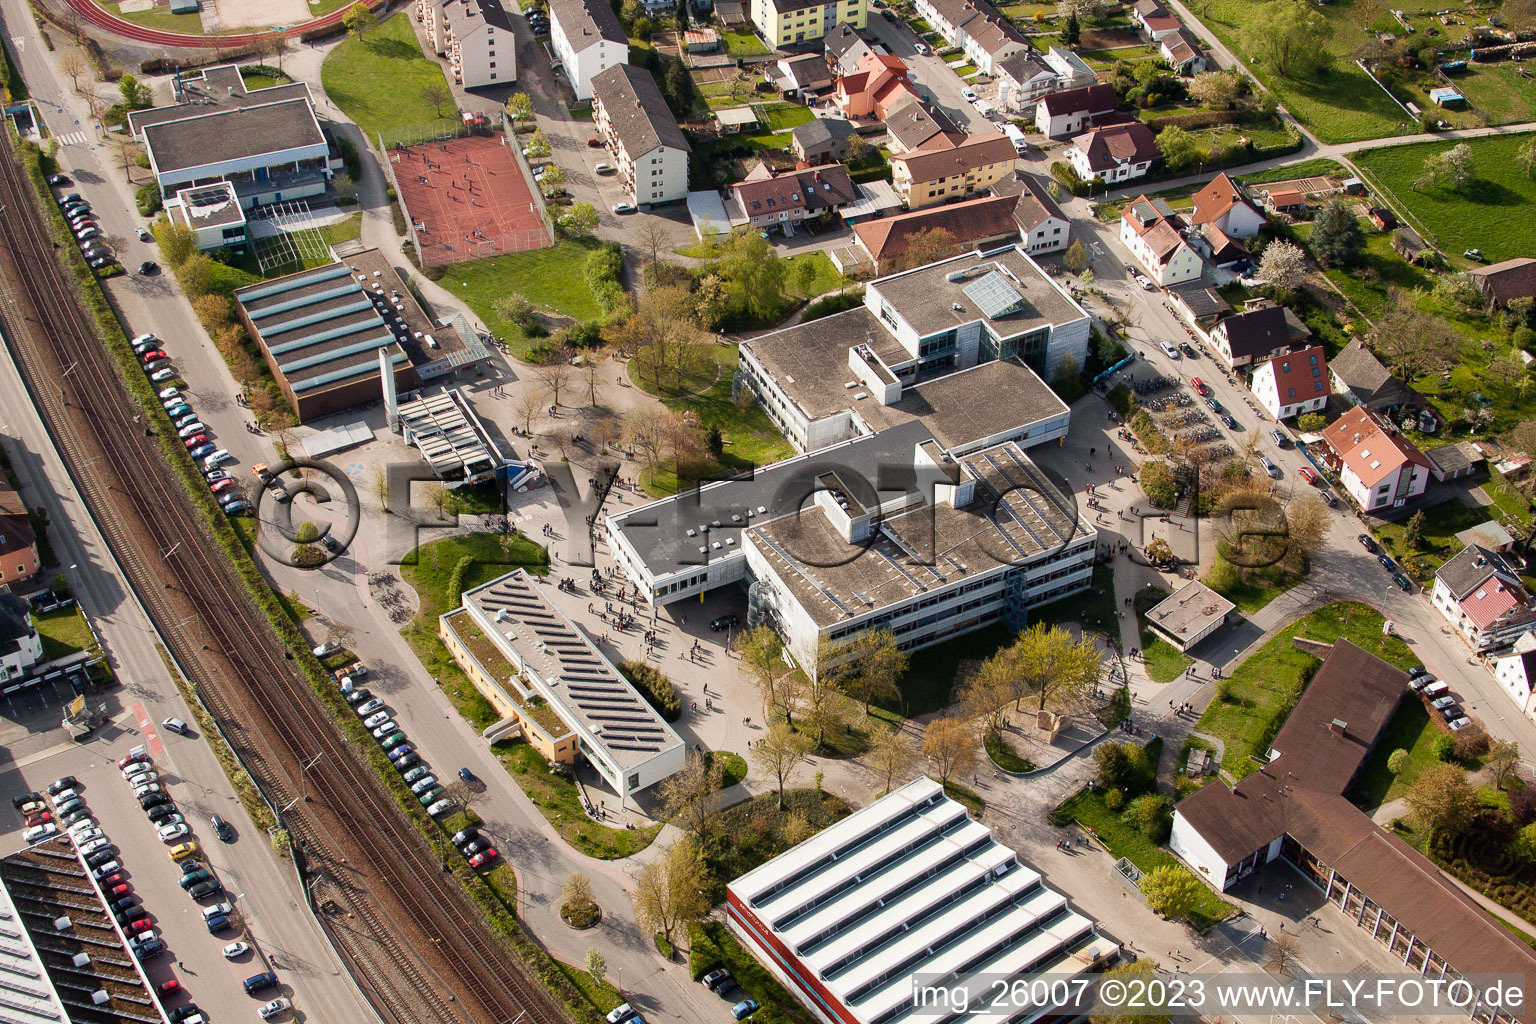 Drone recording of School building of the Ludwig-Marum-Gymnasium Pfinztal in the district Berghausen in Pfinztal in the state Baden-Wurttemberg